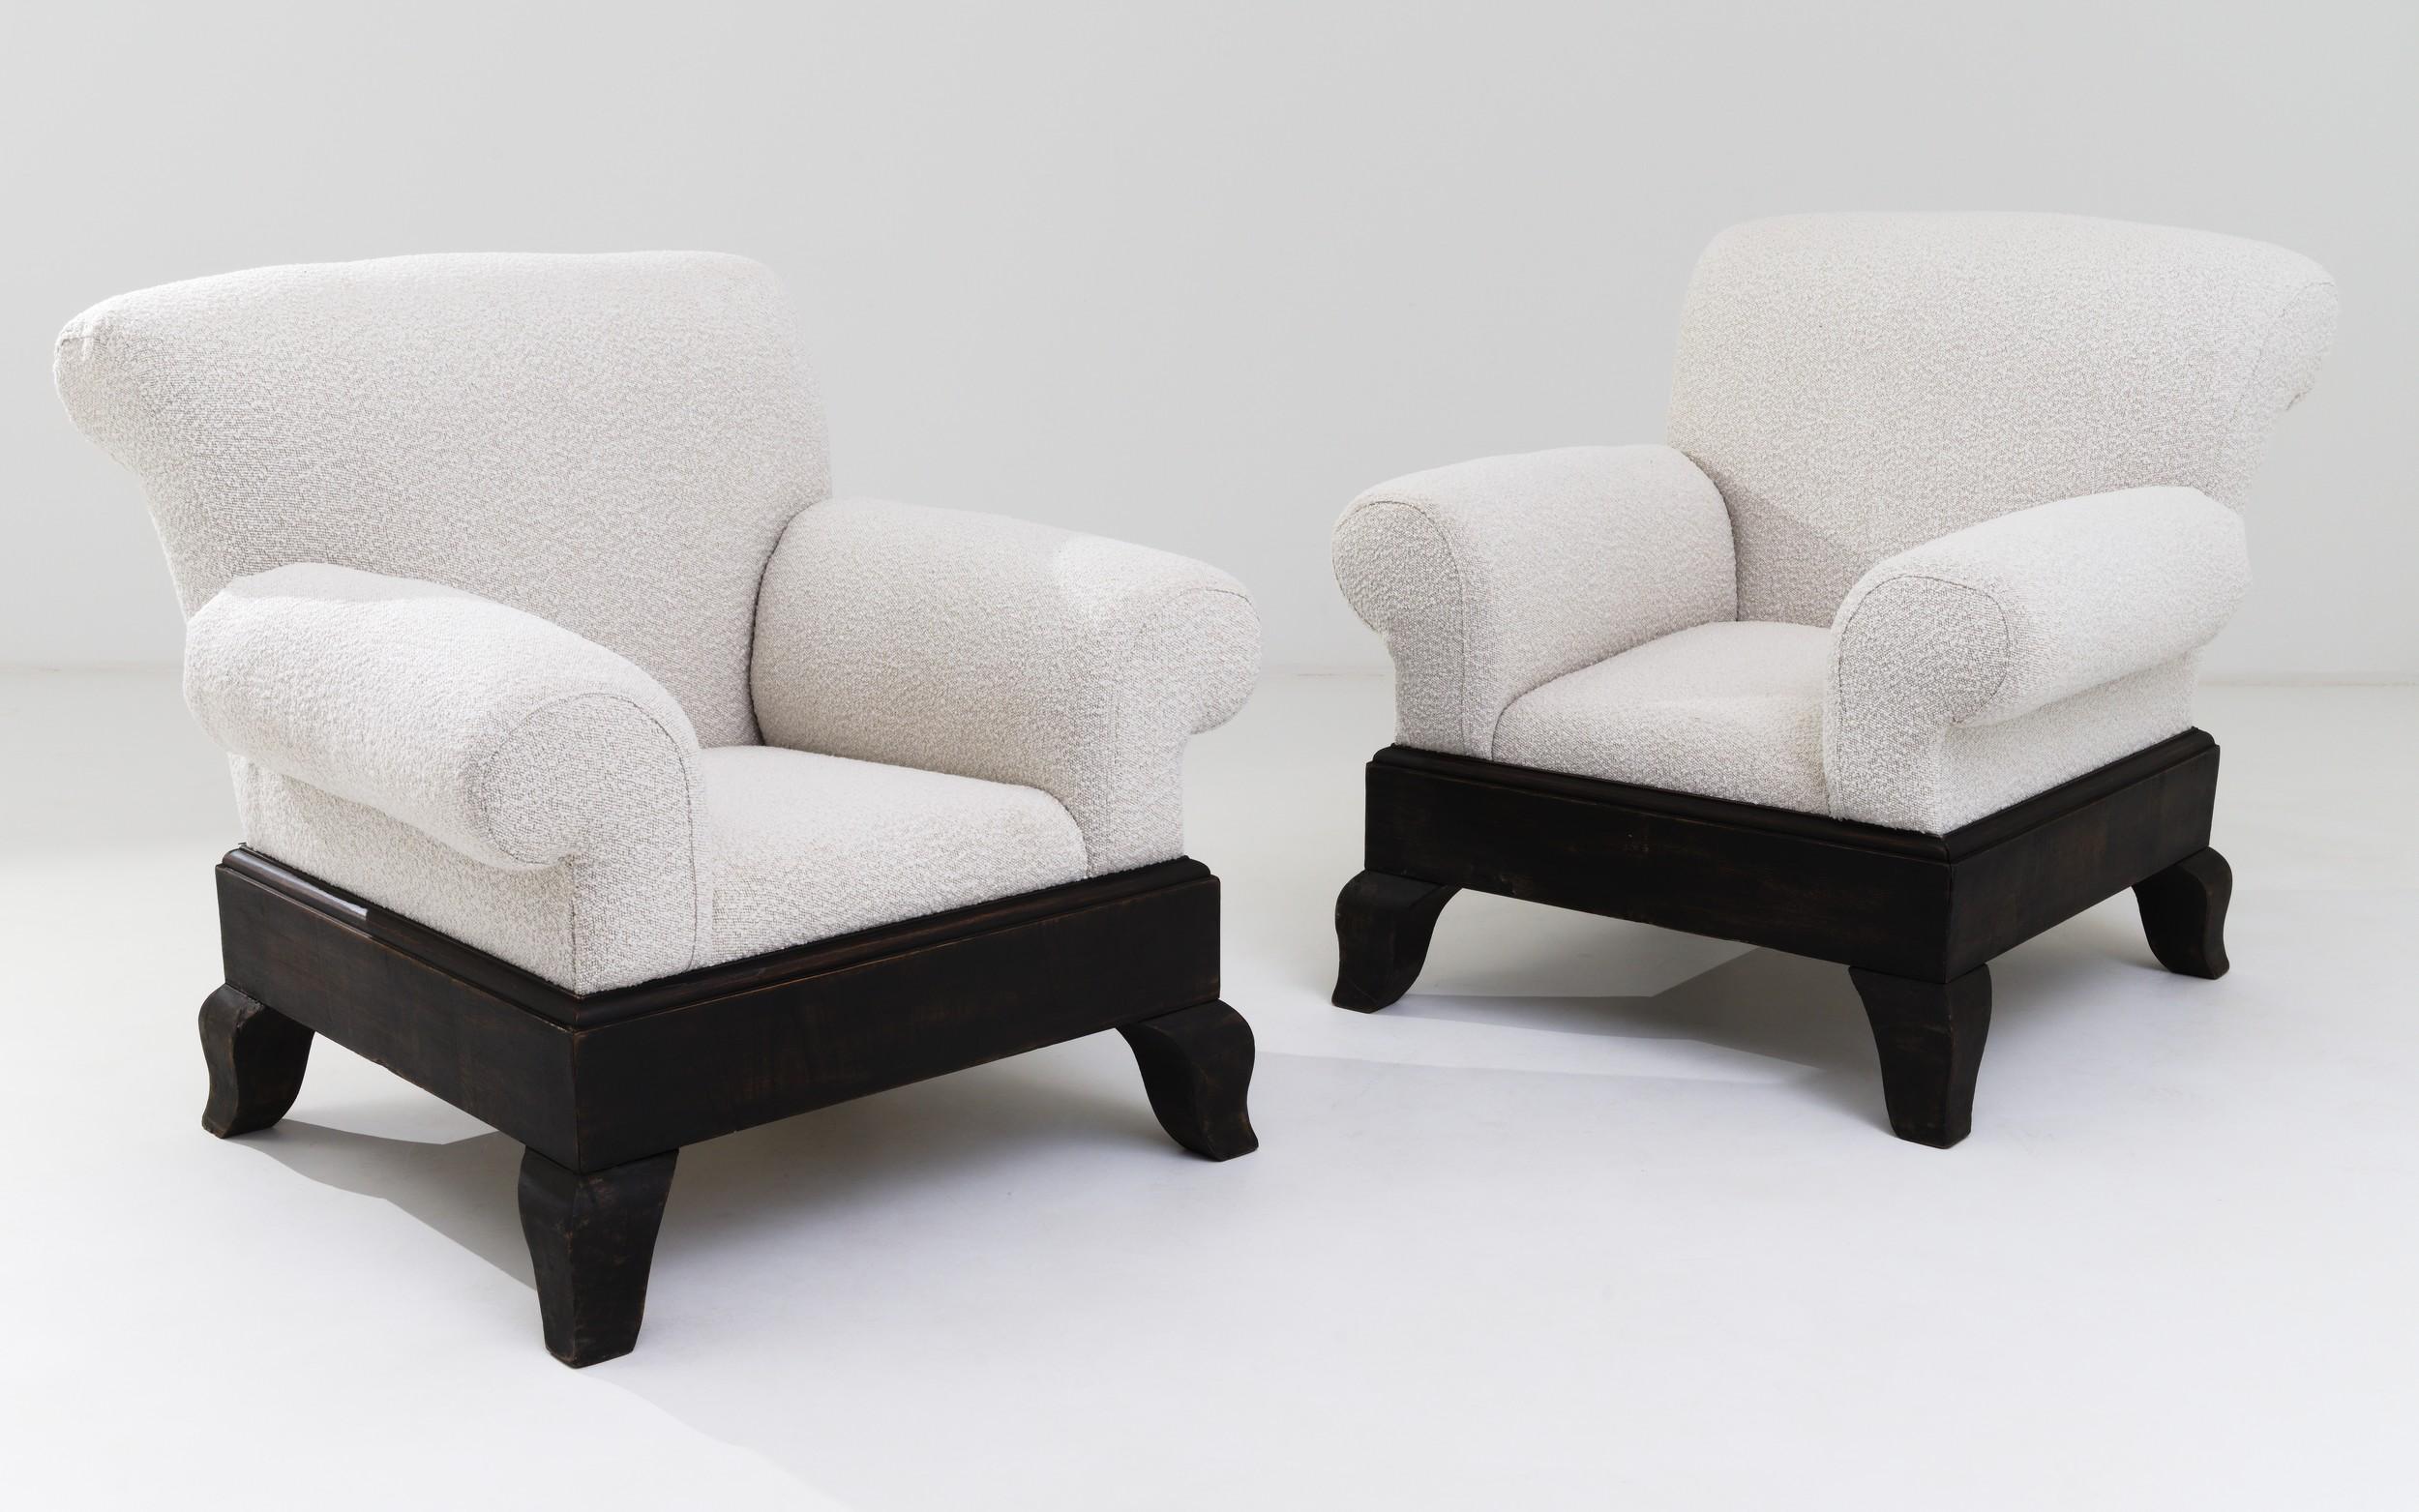 20th Century British Wooden Upholstered Armchairs, a Pair  For Sale 4